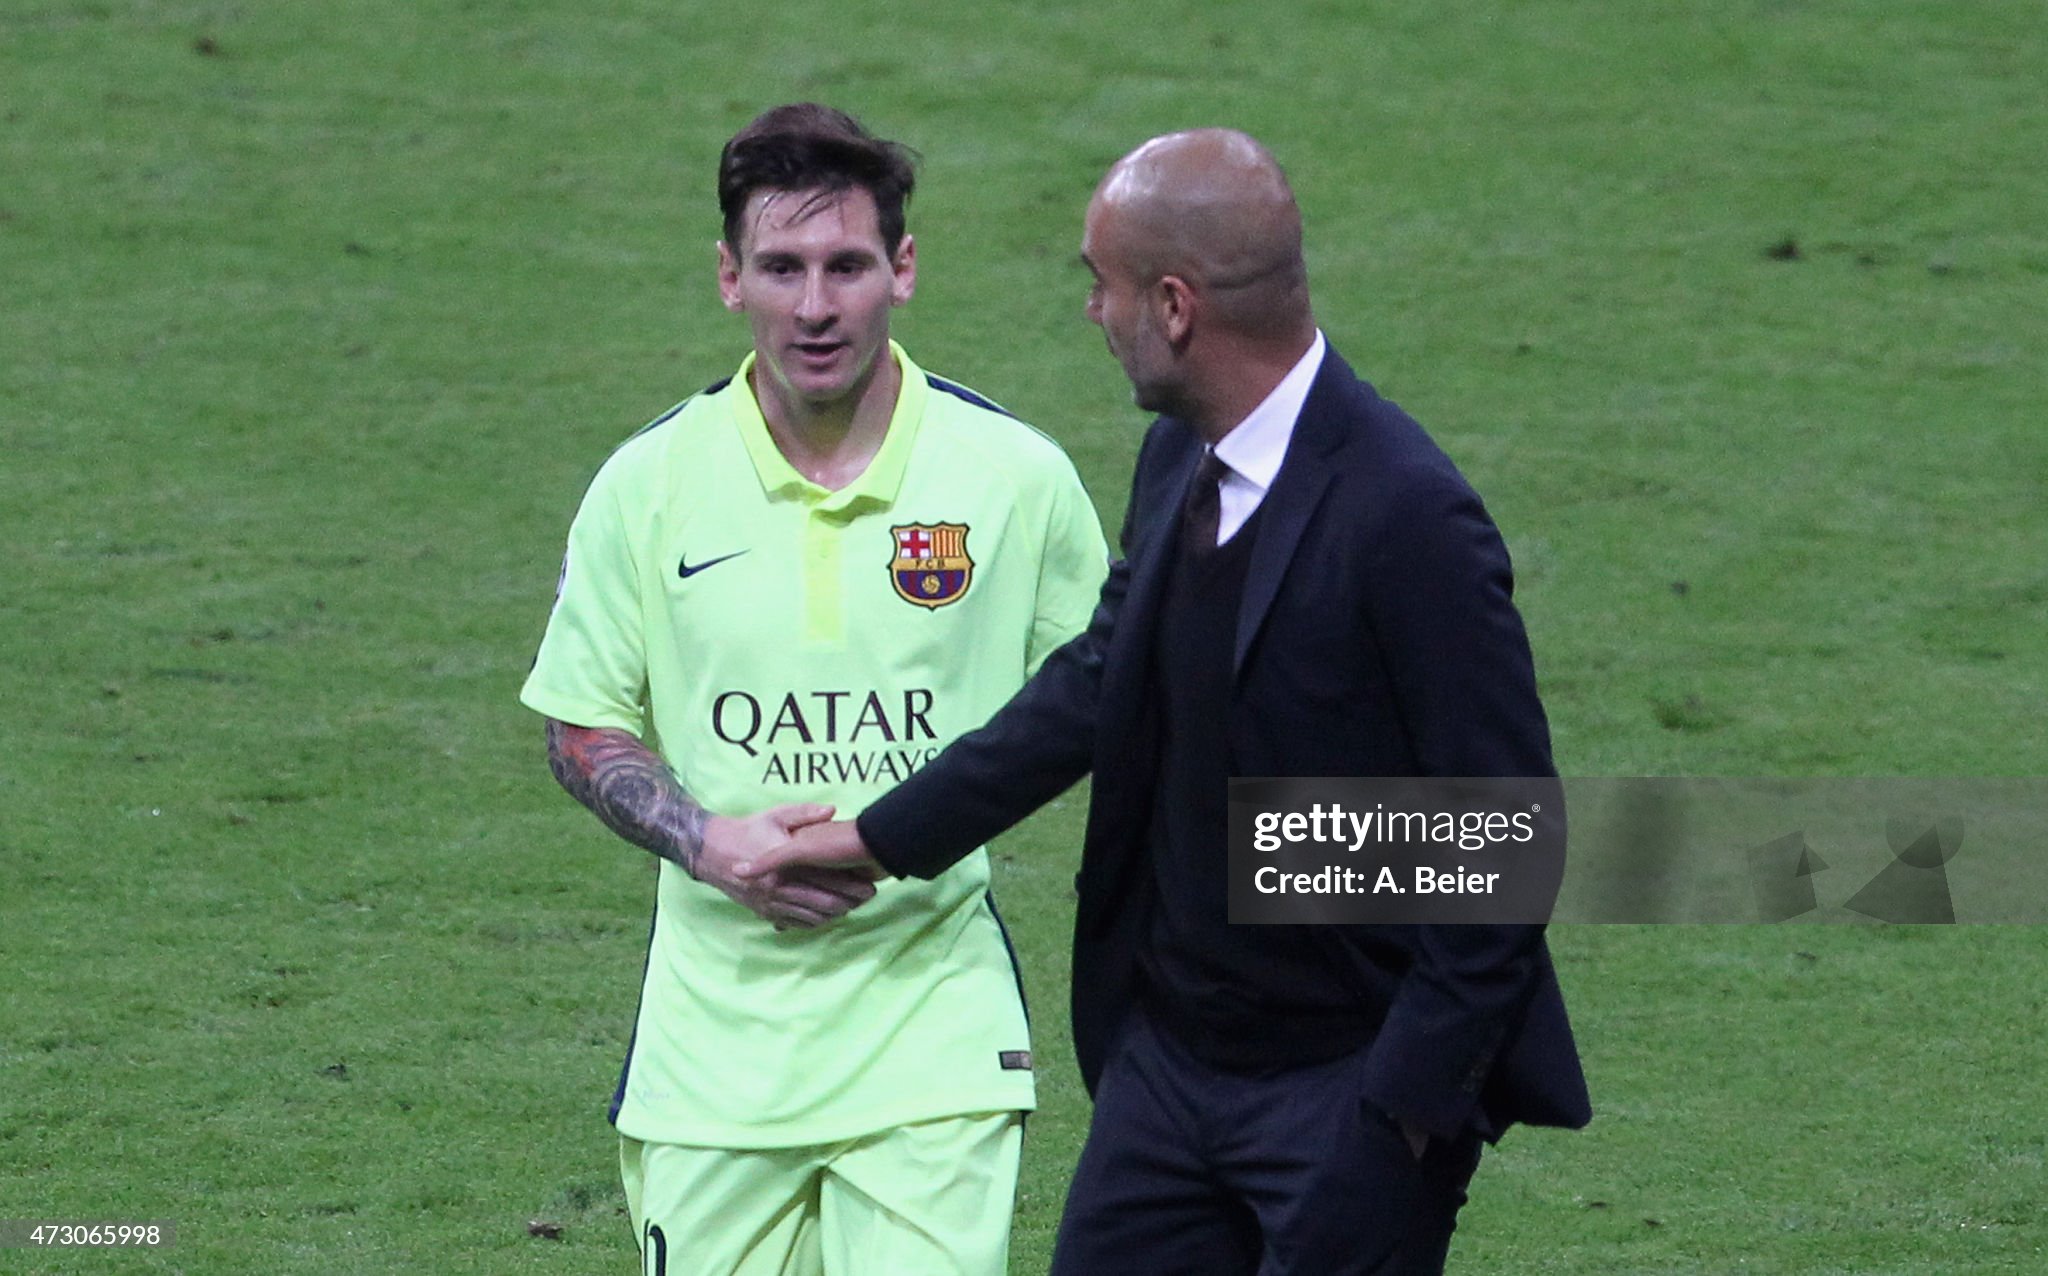 Messi offered himself to Guardiola and City during Barcelona impasse